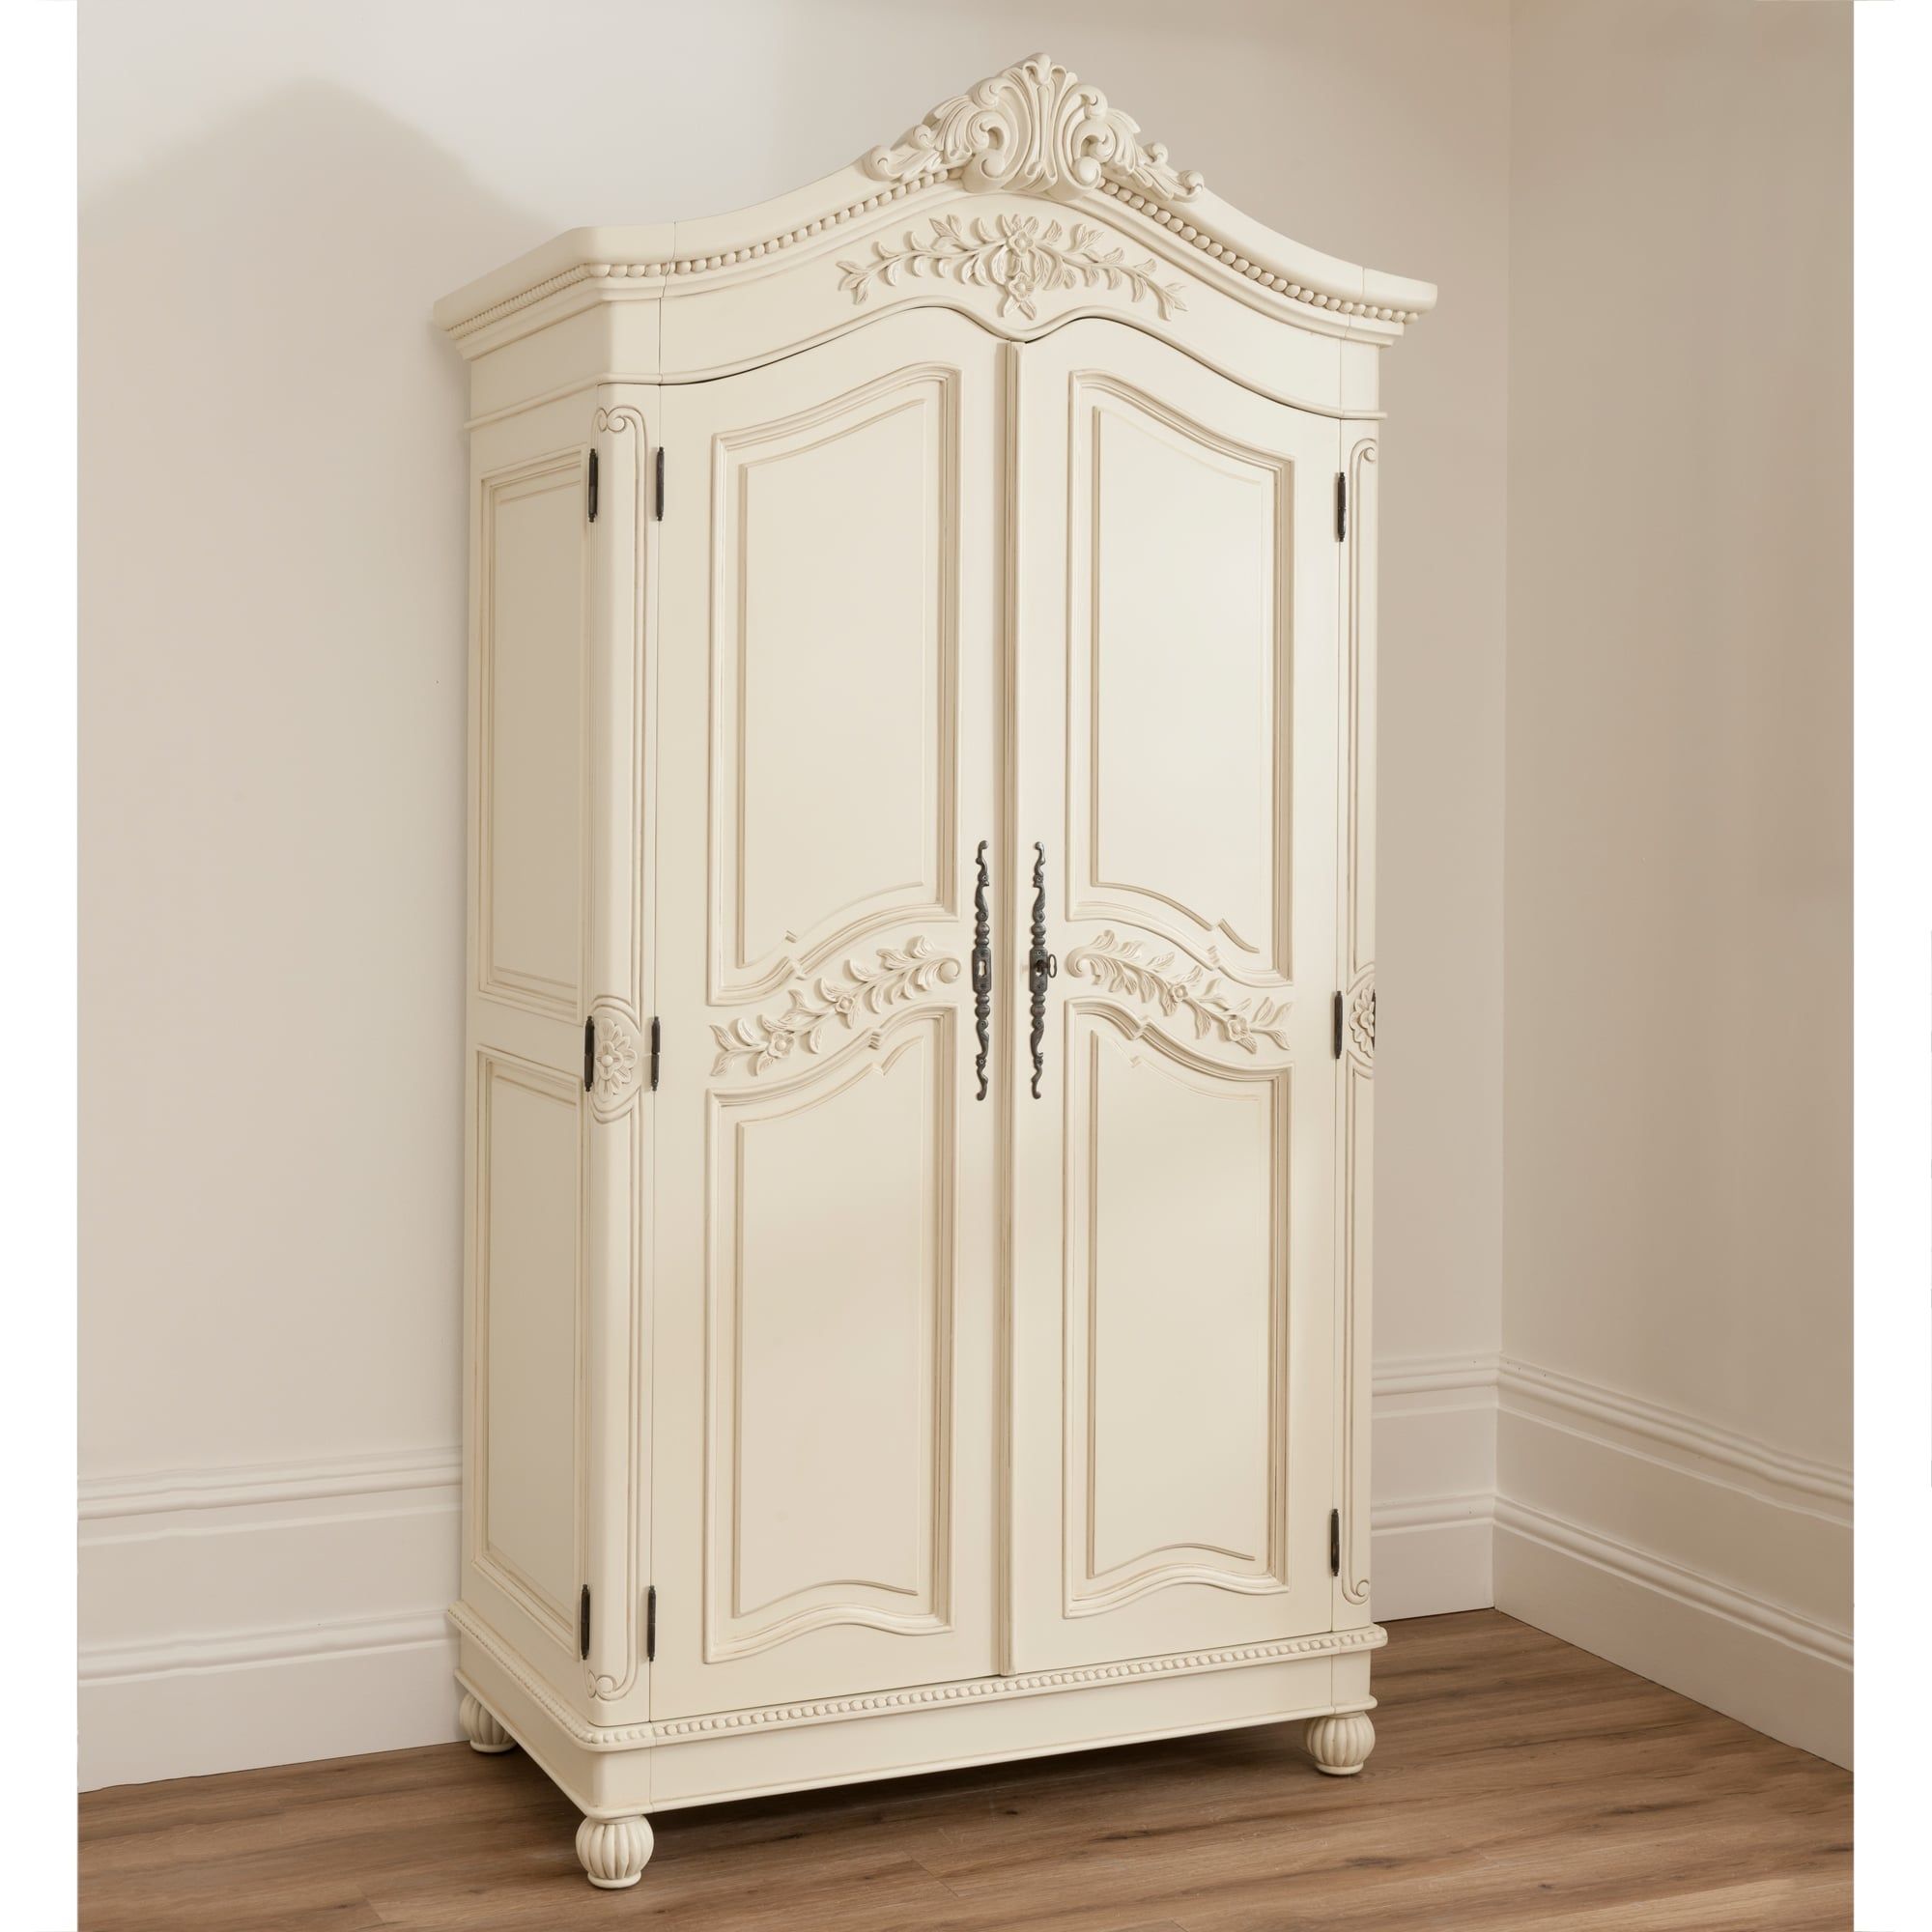 Bordeaux Ivory Shabby Chic Wardrobe | Shabby Chic Furniture With Regard To Shabby Chic Wardrobes For Sale (View 13 of 15)